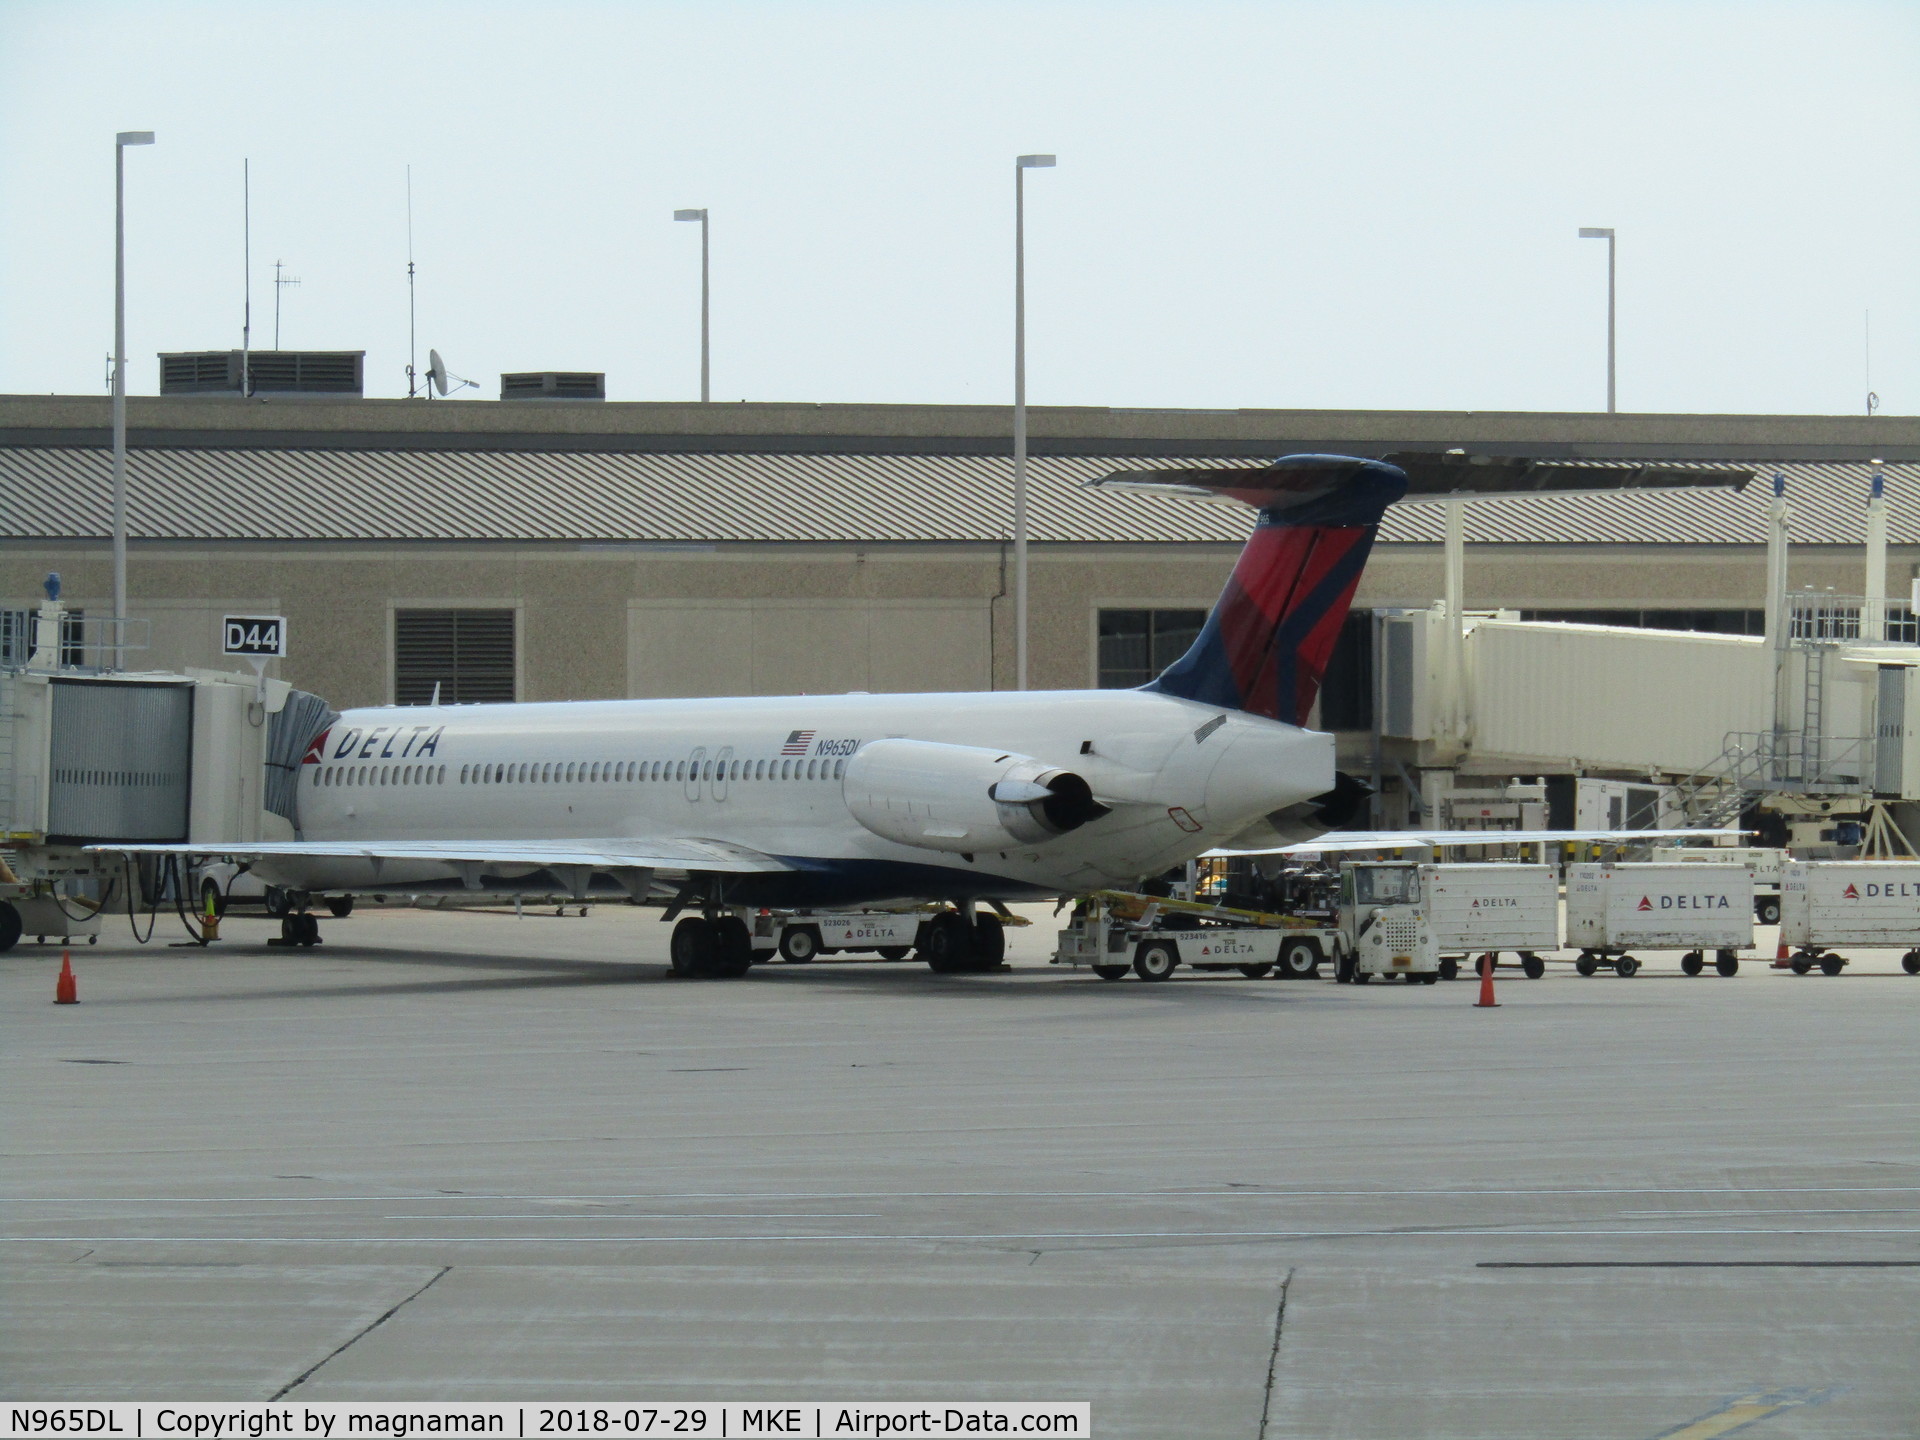 N965DL, 1990 McDonnell Douglas MD-88 C/N 49984, on stand at MKE